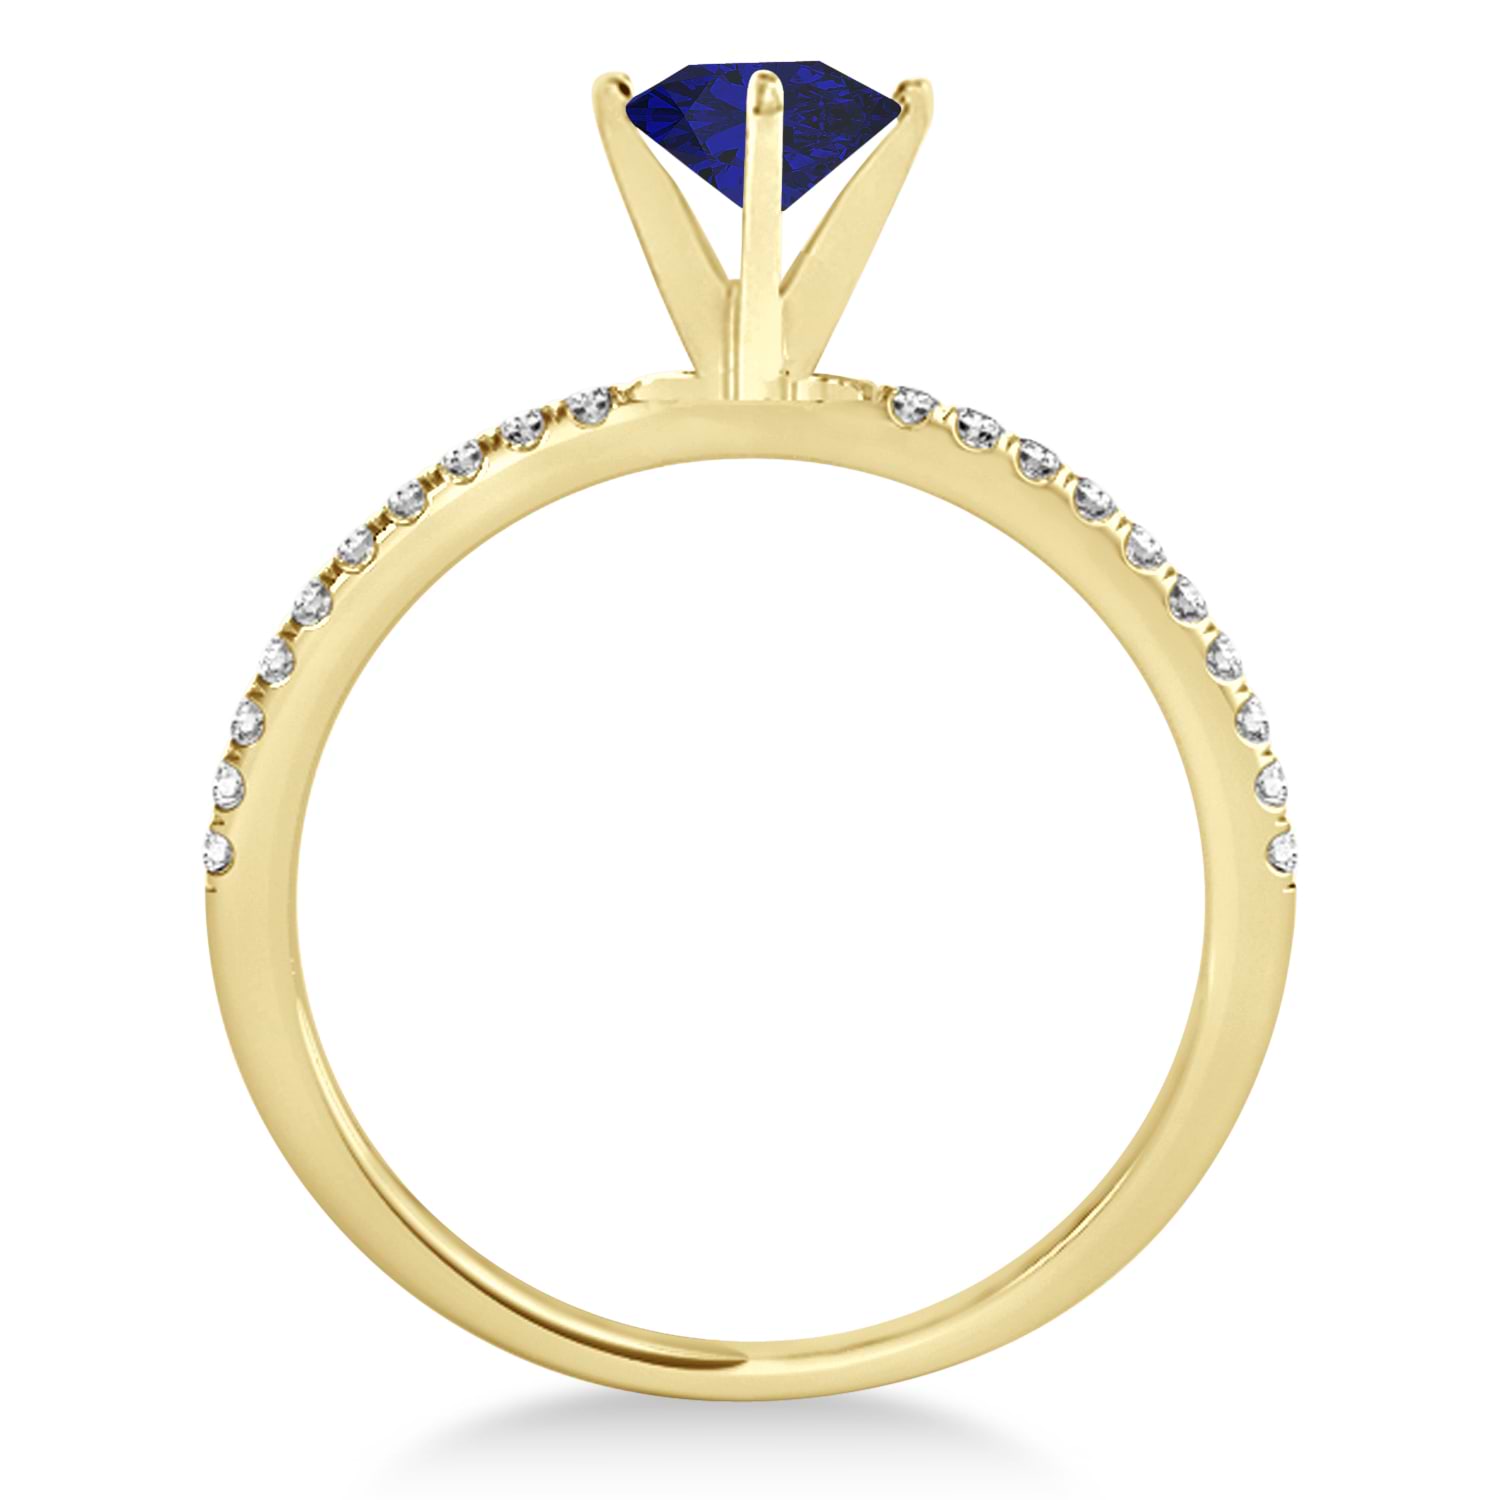 Blue Sapphire & Diamond Accented Oval Shape Engagement Ring 18k Yellow Gold (1.50ct)